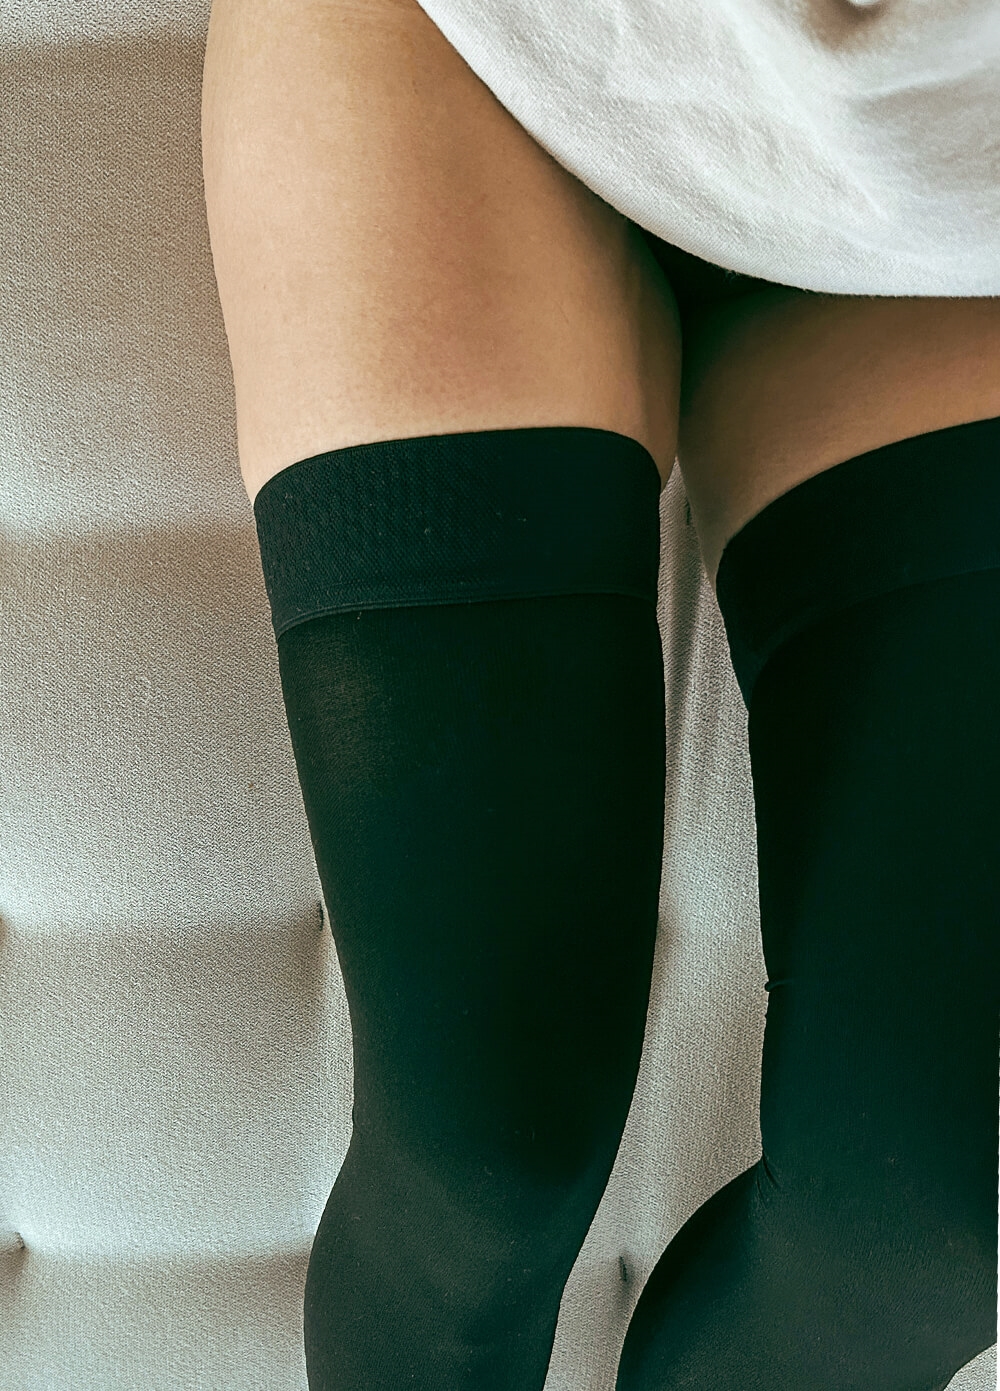 Mama Sox - Vivify Thigh High Compression Stockings in Black